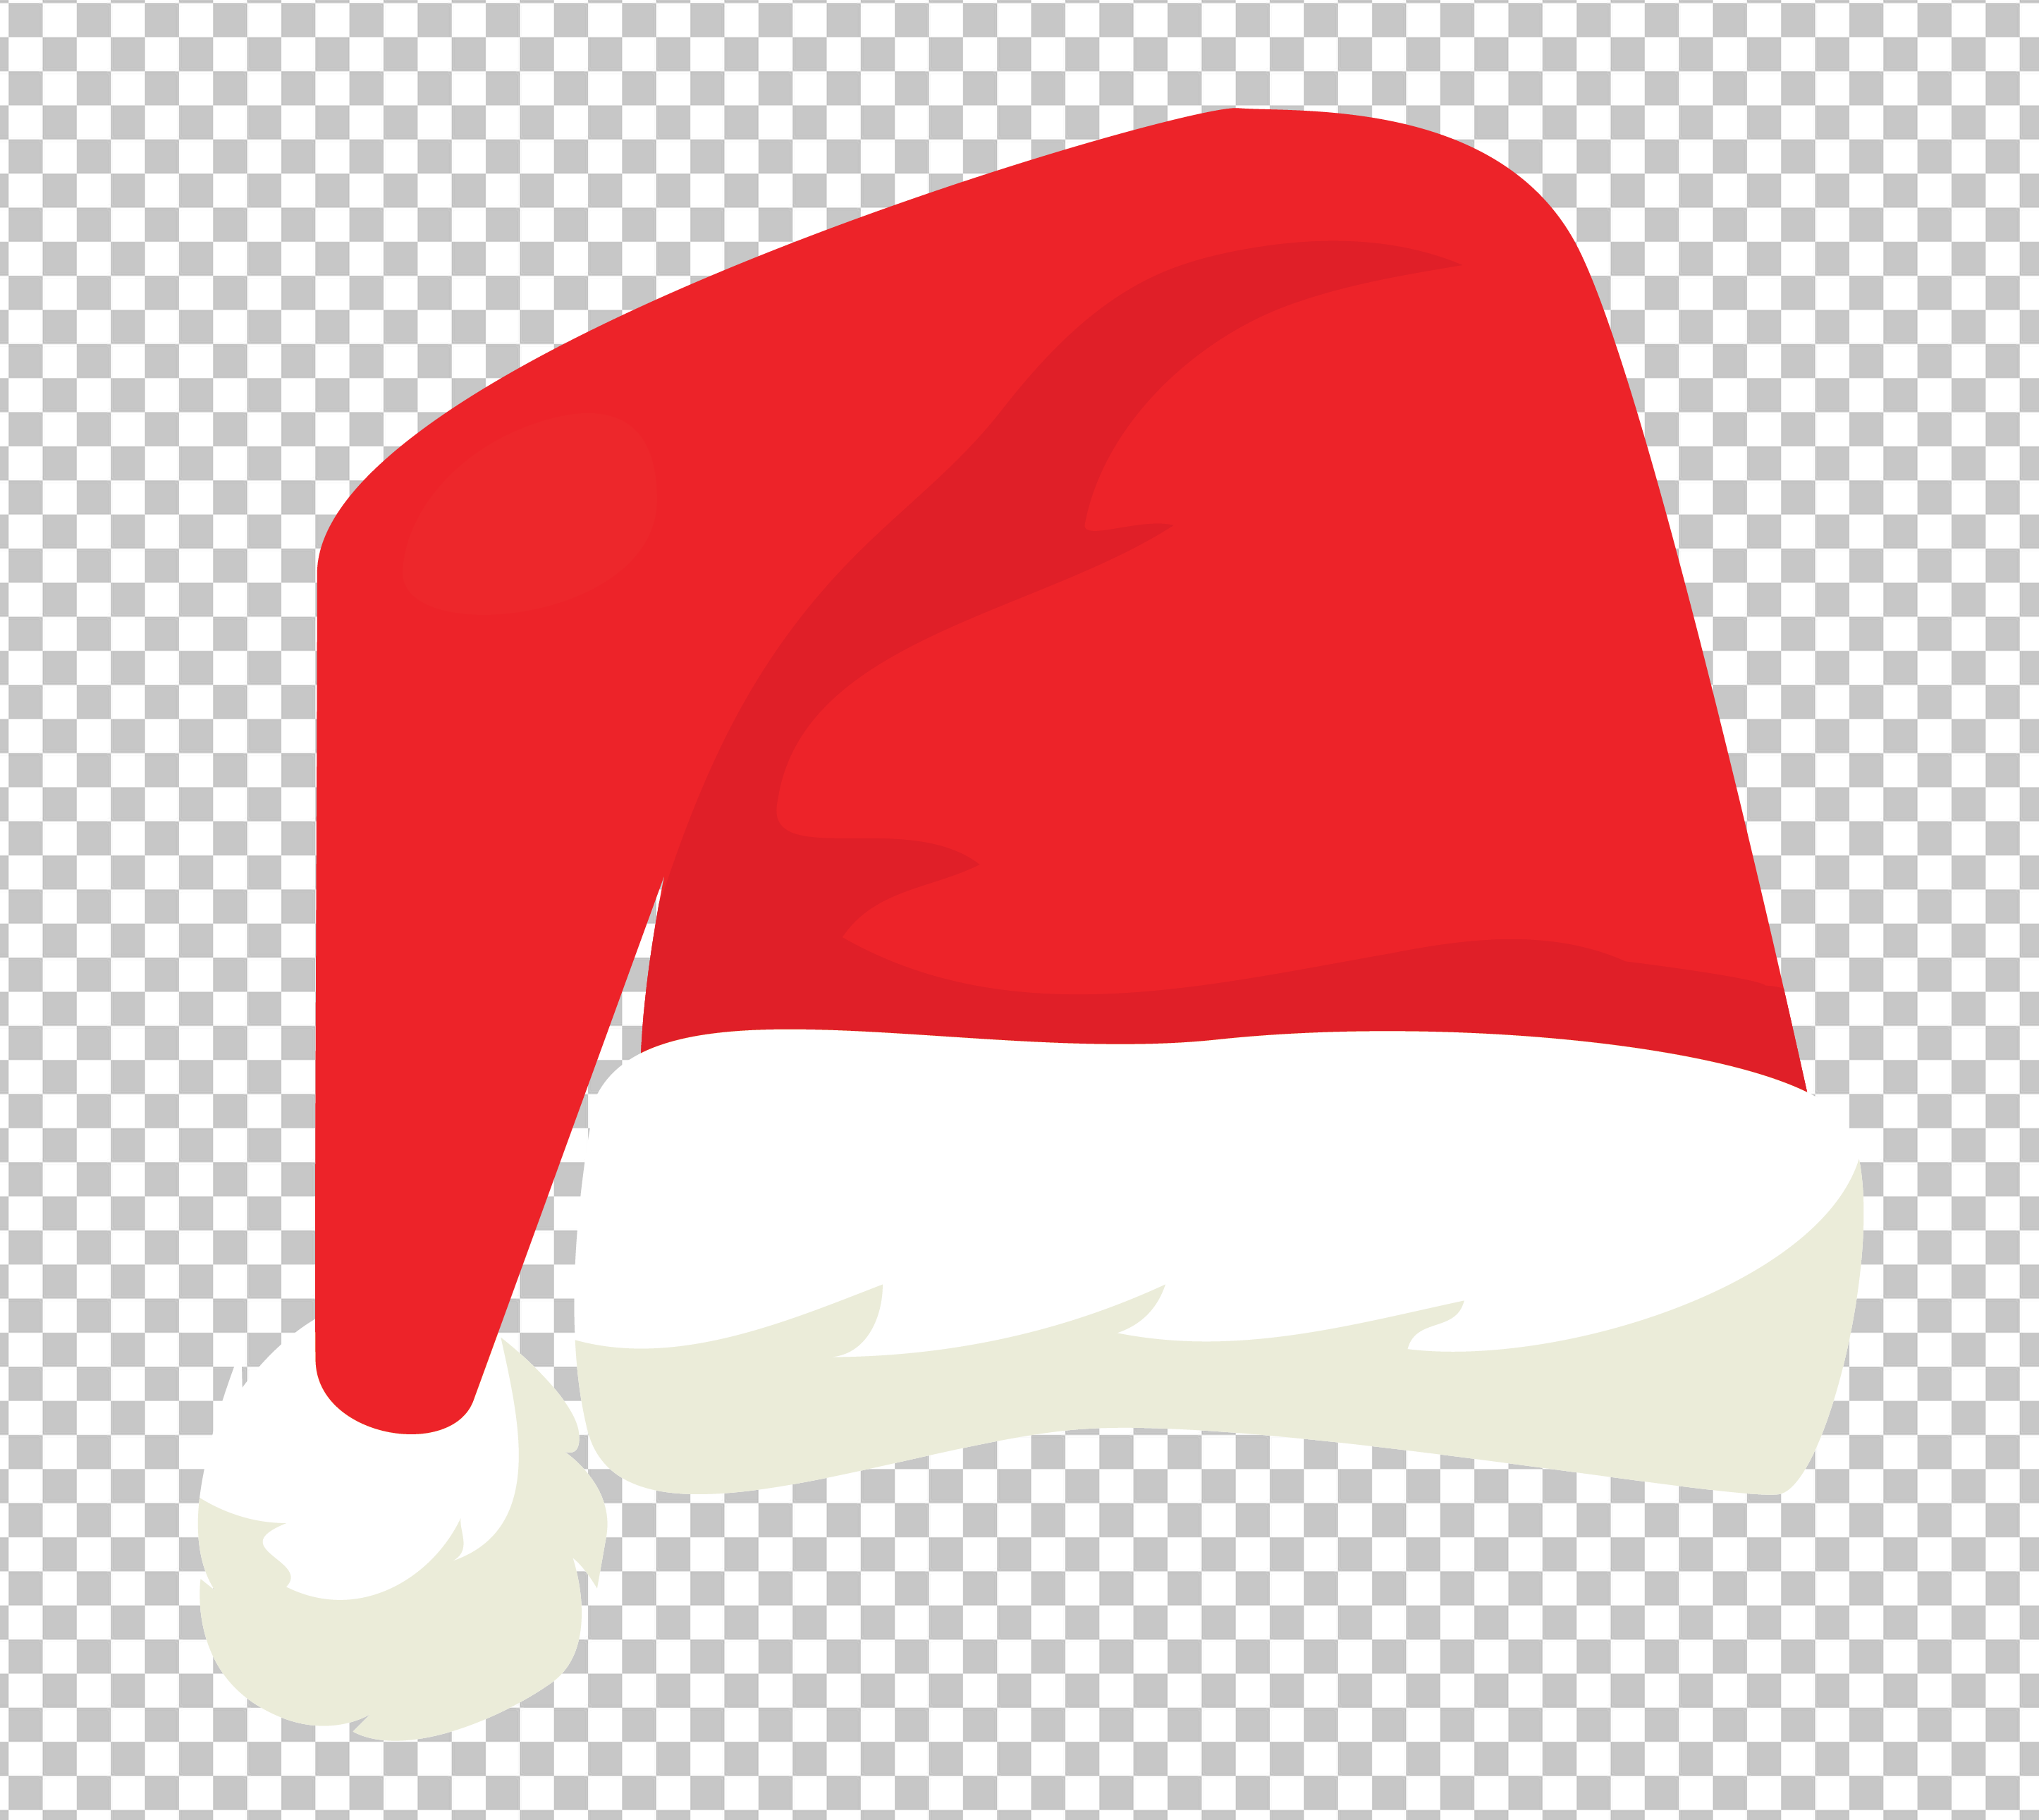 Red and White Santa Hat on Transparent Background PNG Image